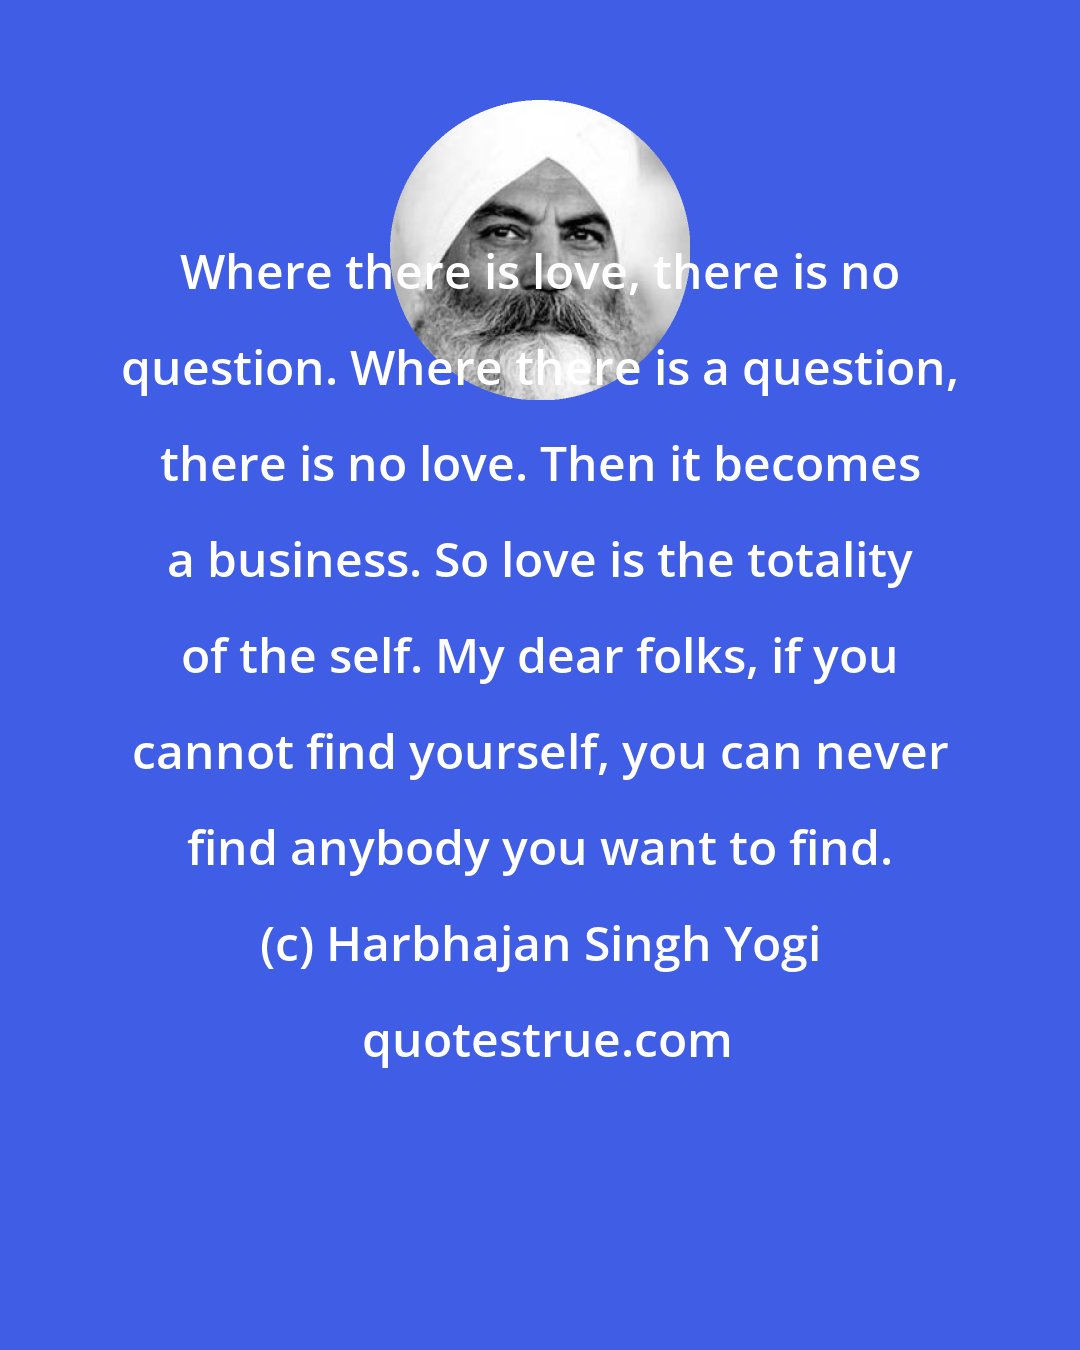 Harbhajan Singh Yogi: Where there is love, there is no question. Where there is a question, there is no love. Then it becomes a business. So love is the totality of the self. My dear folks, if you cannot find yourself, you can never find anybody you want to find.